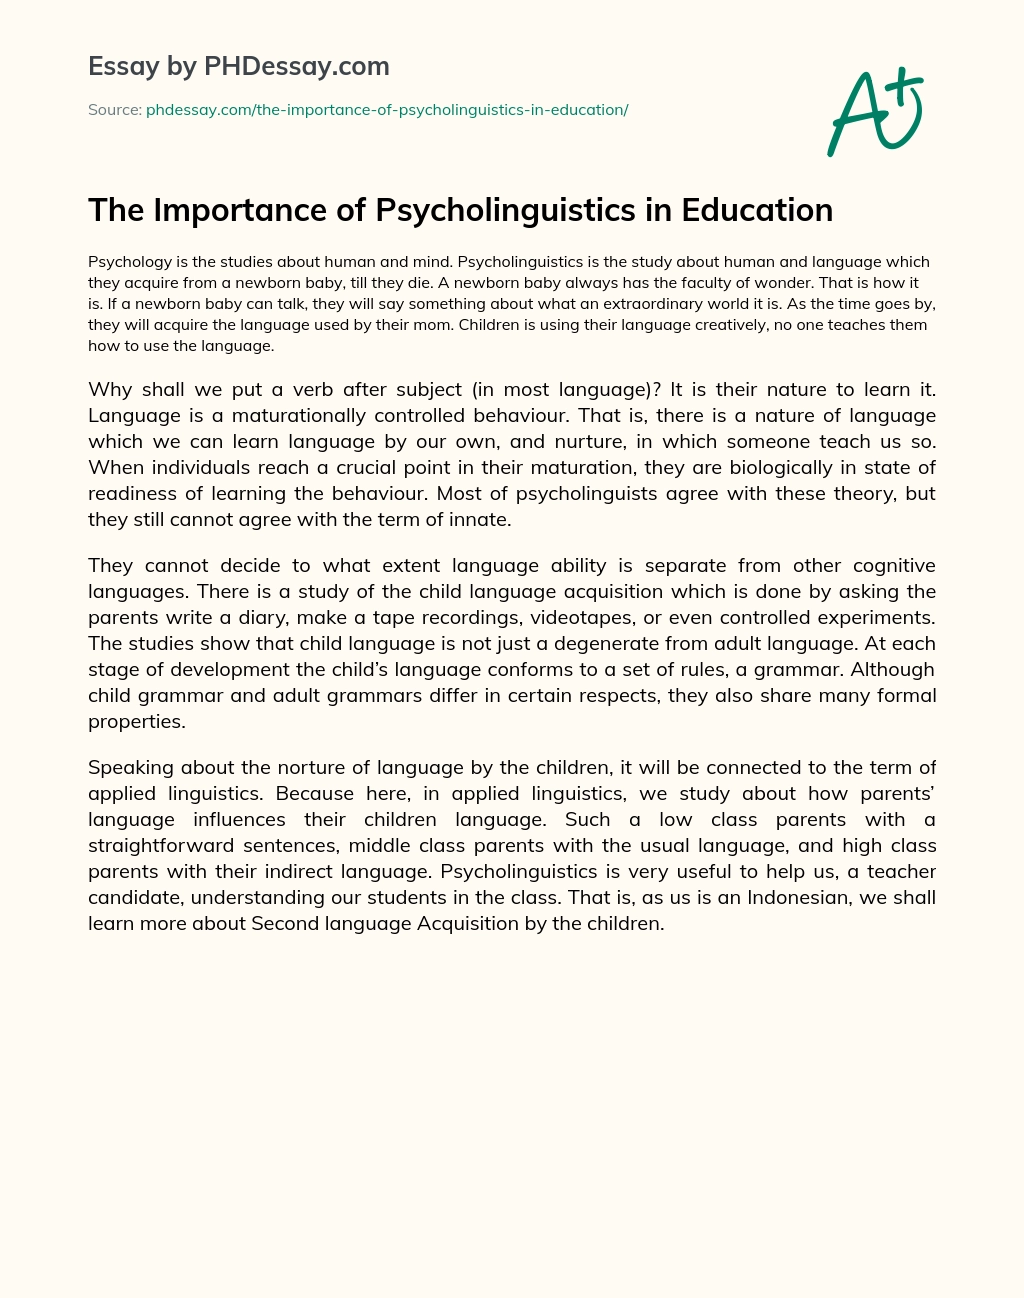 The Importance of Psycholinguistics in Education essay